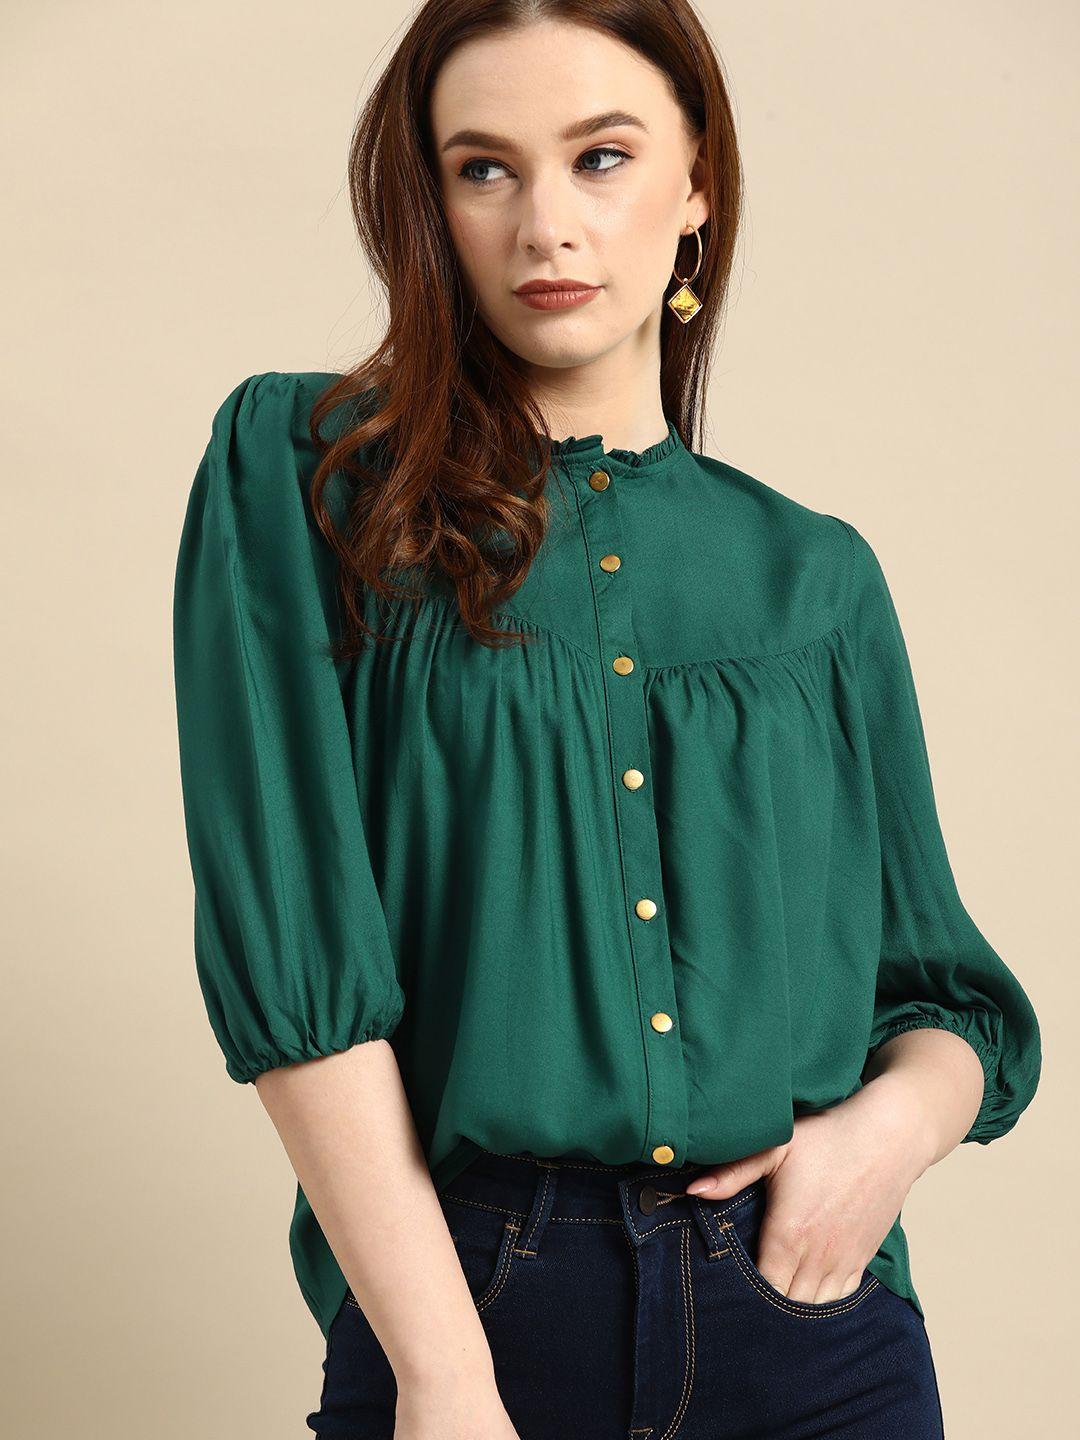 all about you green solid bishop sleeves shirt style top